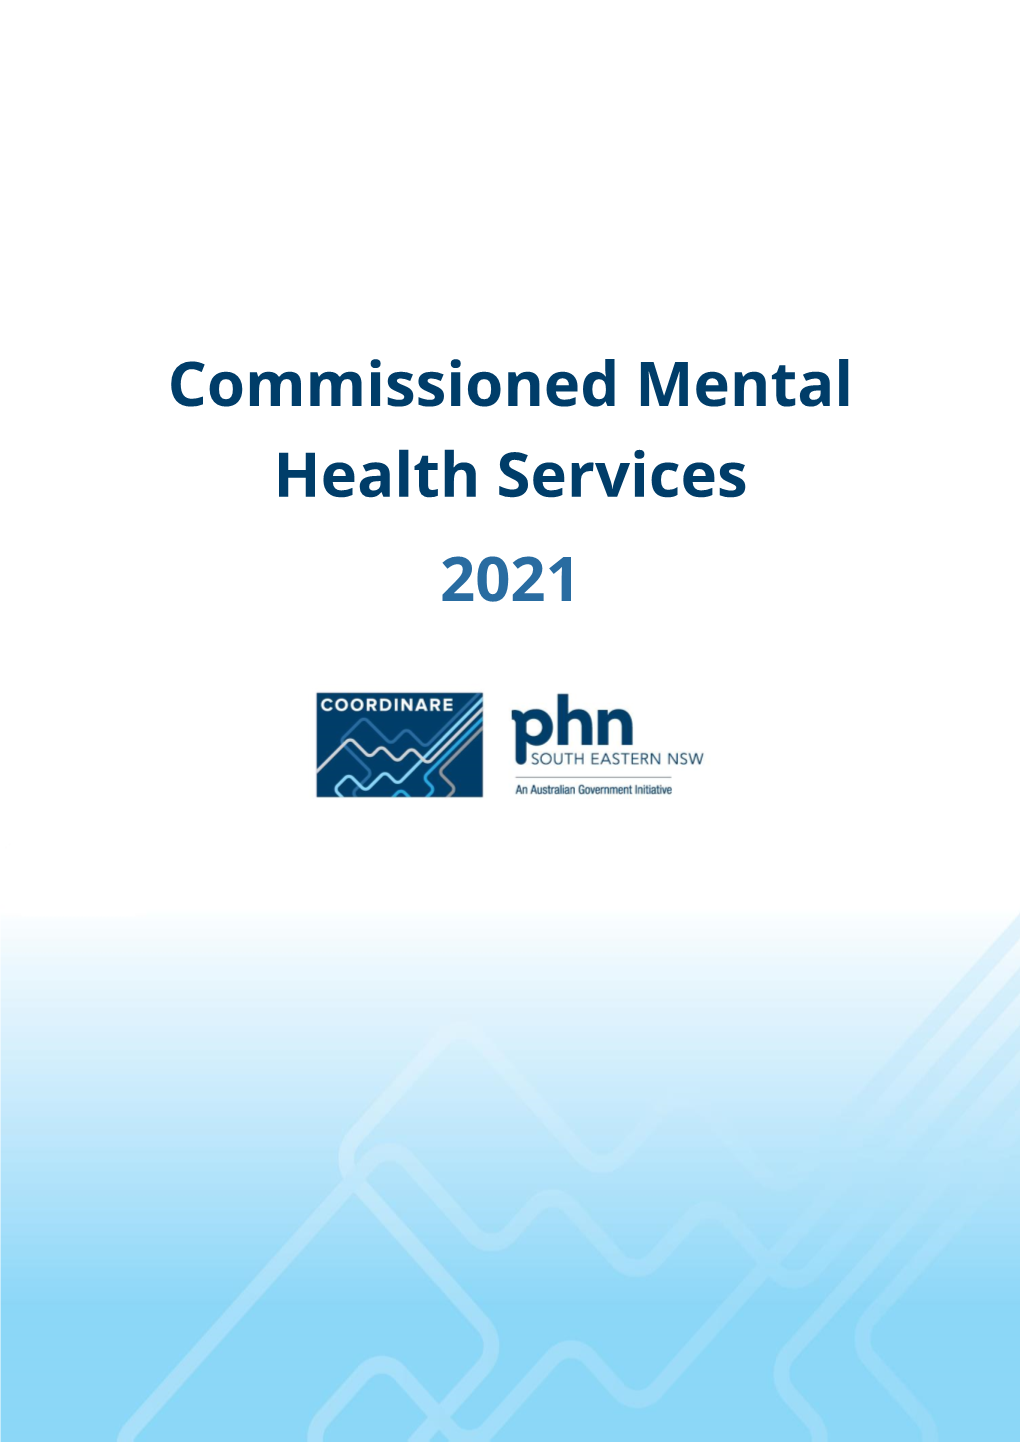 Commissioned Mental Health Services 2021